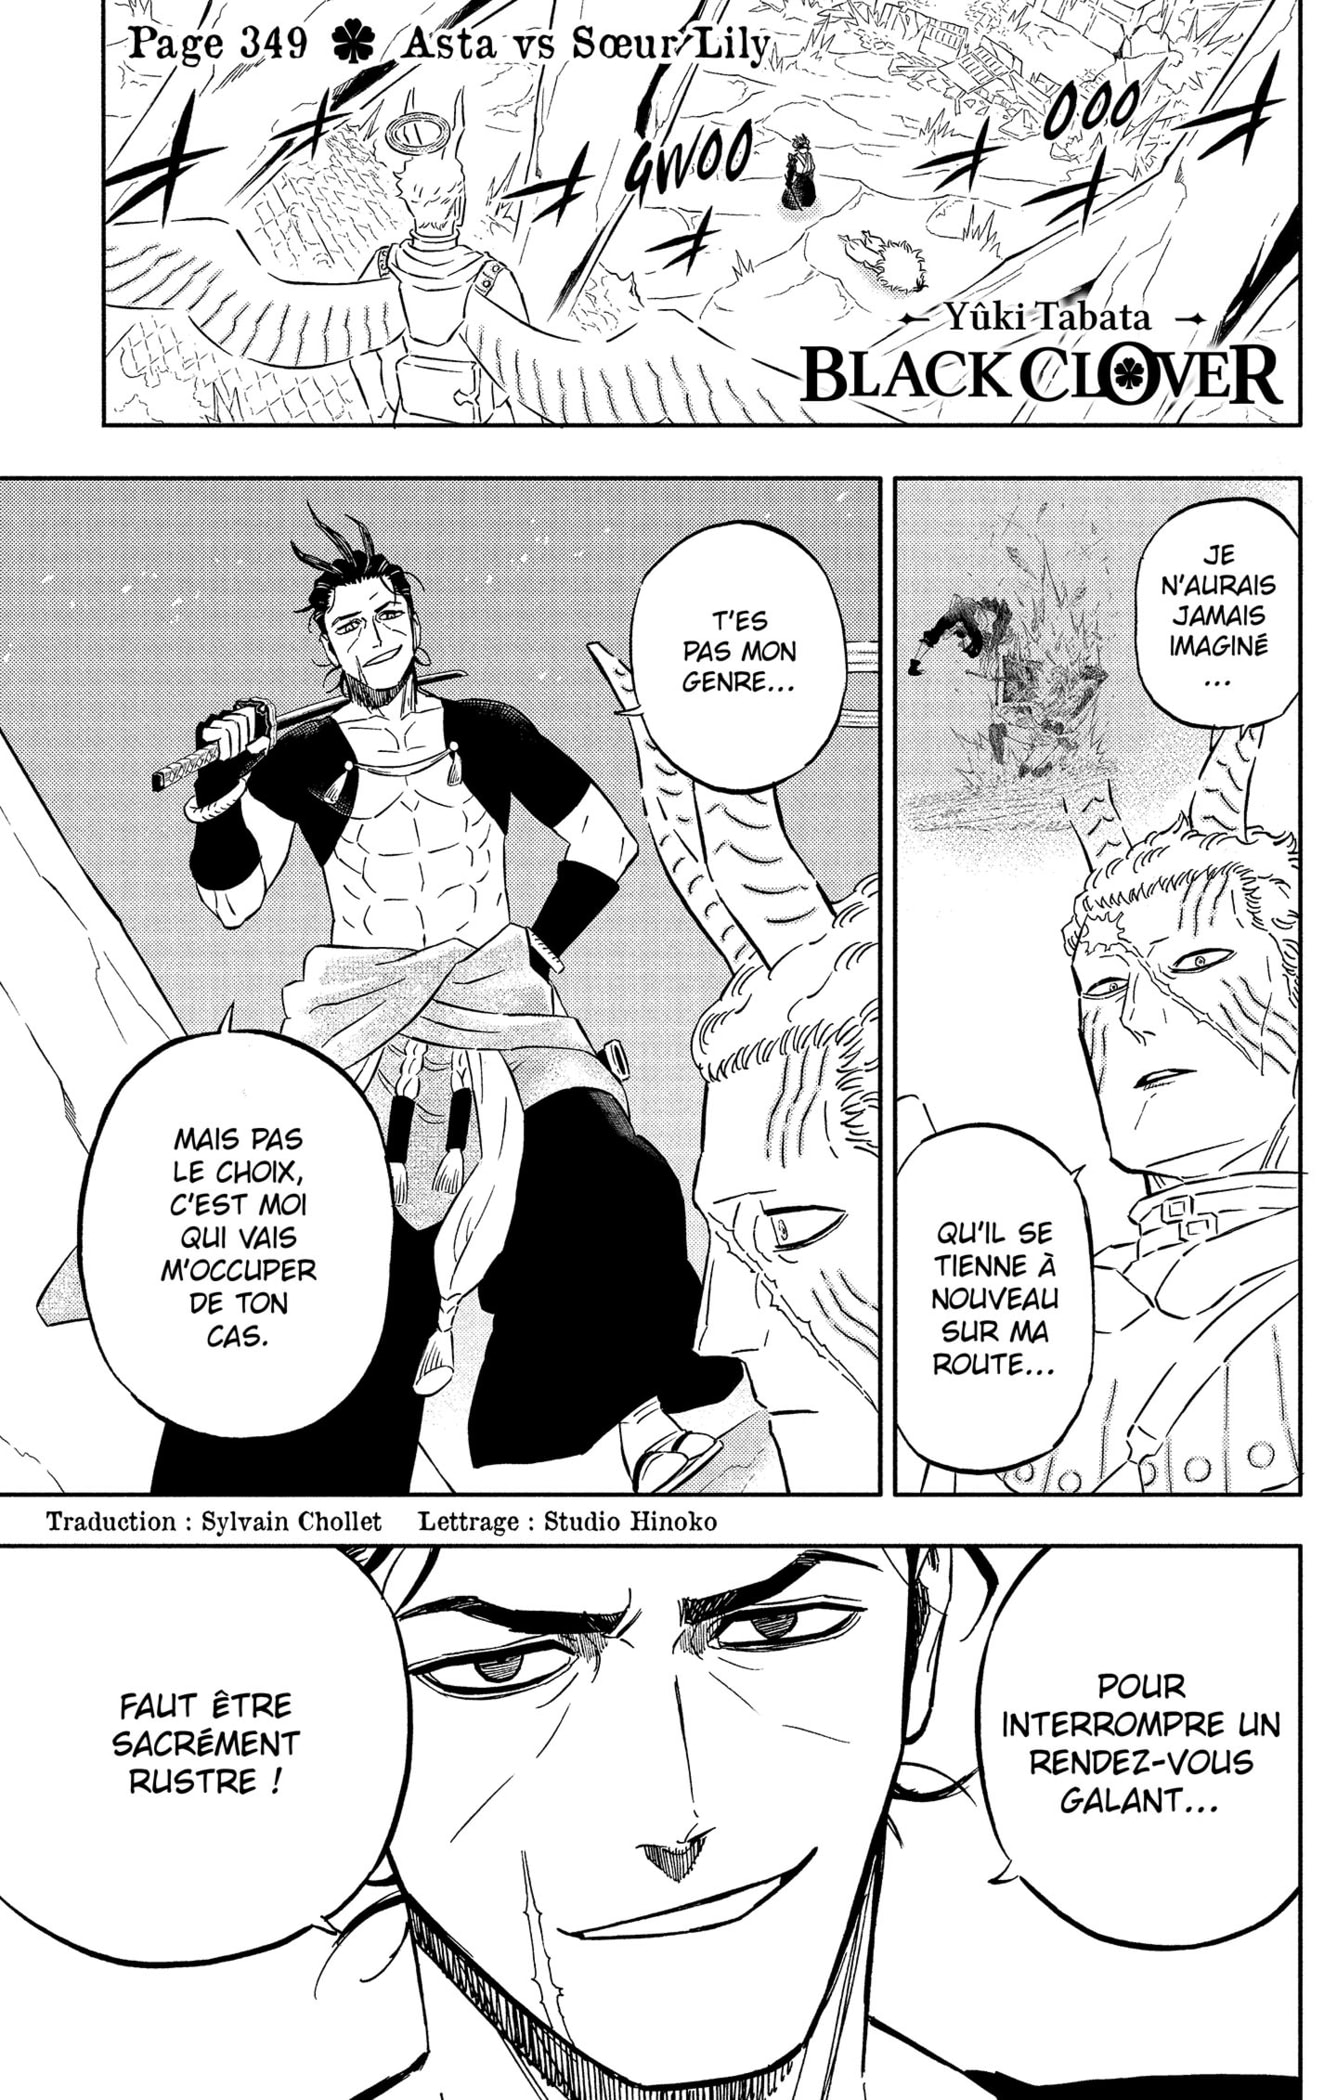 Black Clover: Chapter 349 - Page 1